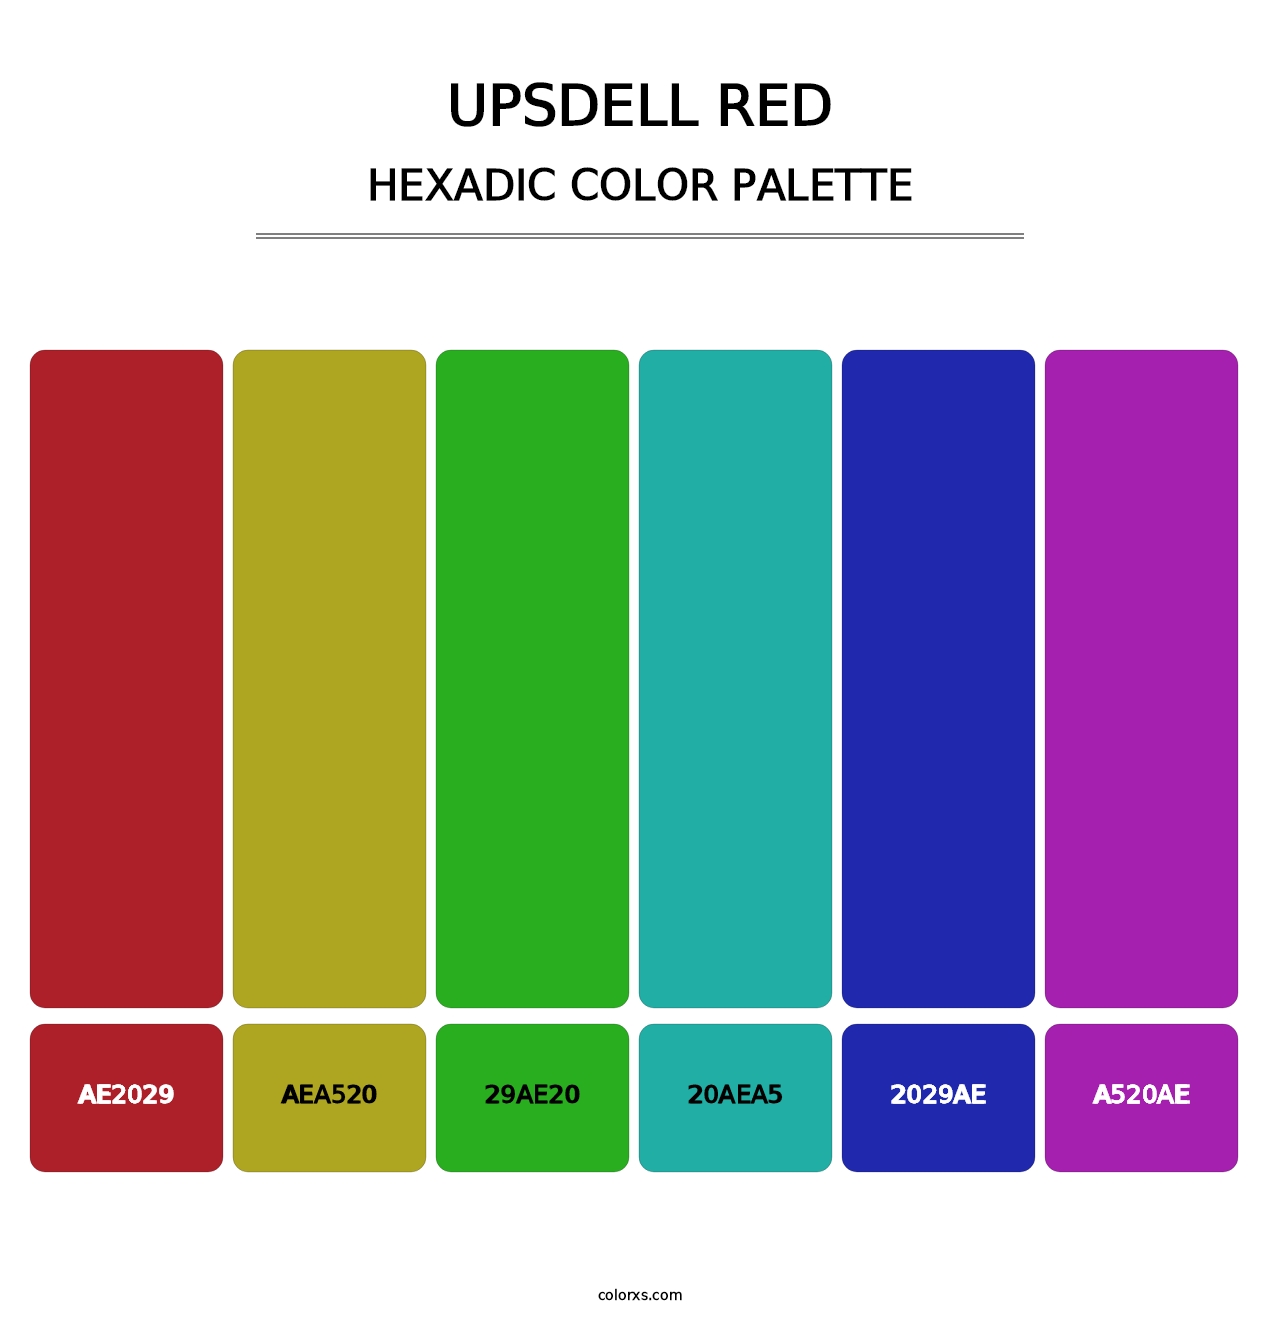 Upsdell Red - Hexadic Color Palette